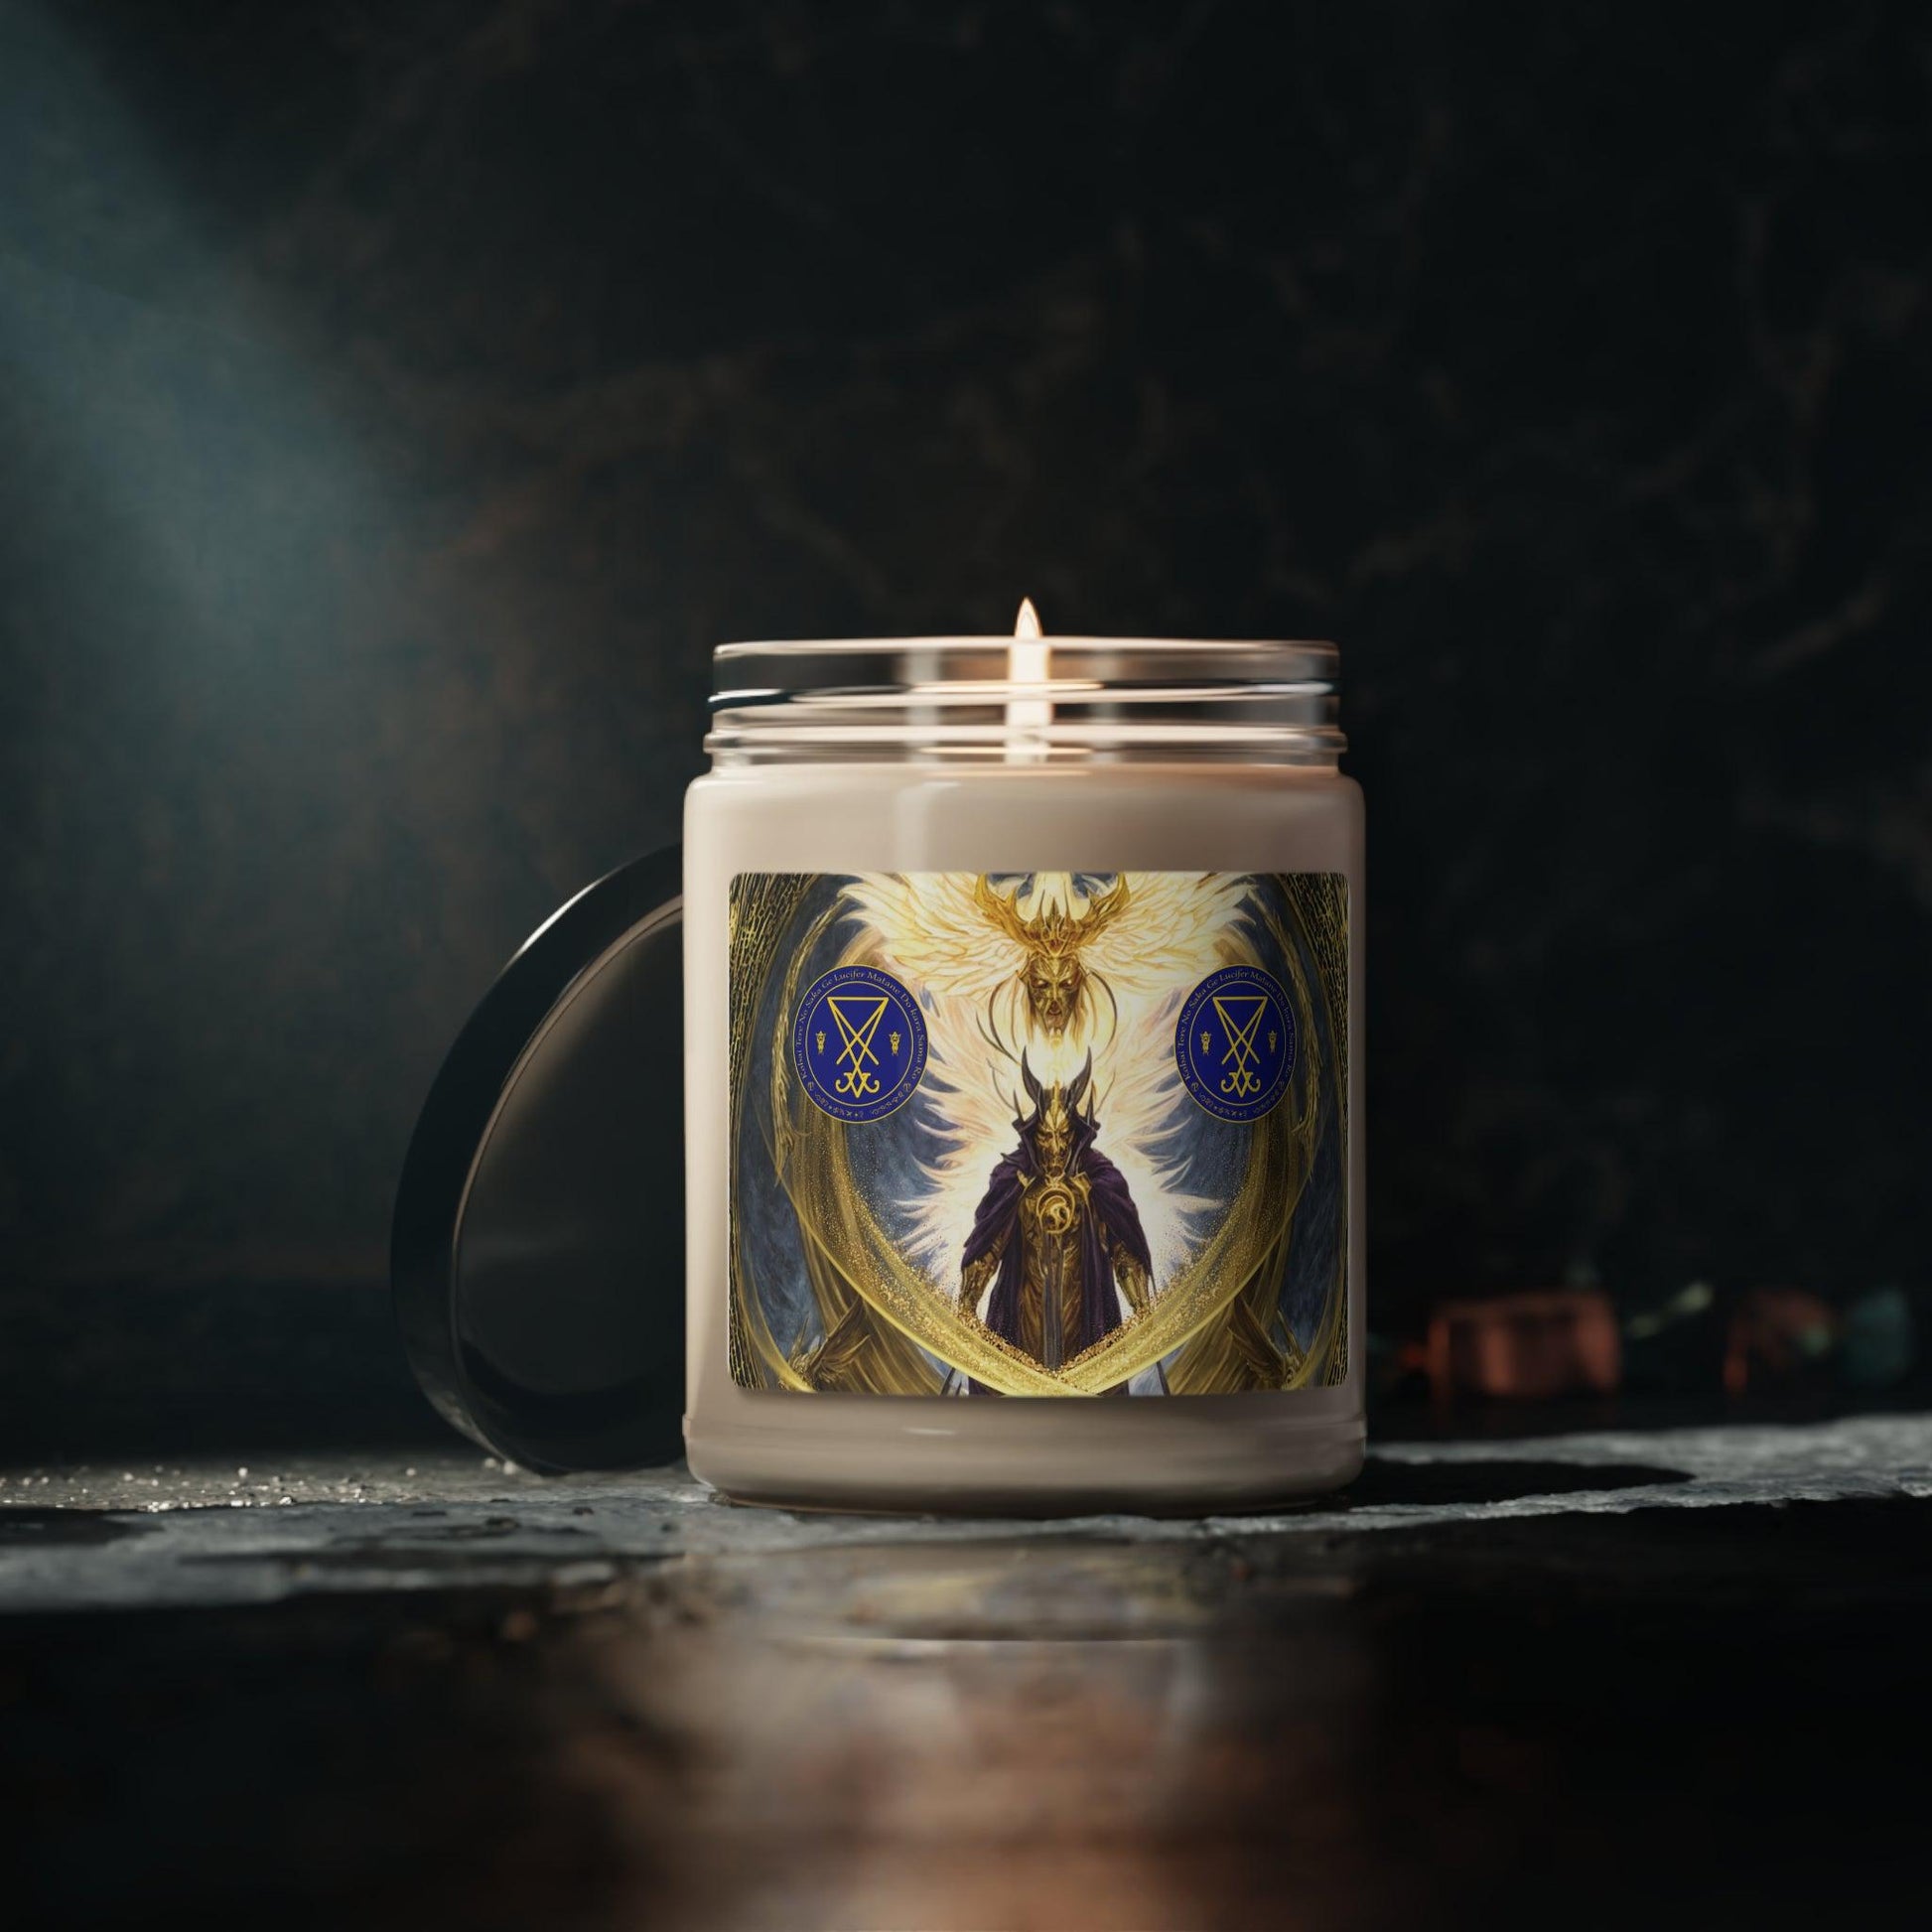 Demon-Lucifer-Scented-Soy-Candle-for-Altar-offerings-rituals-initiations-or-praying-and-meditation-20